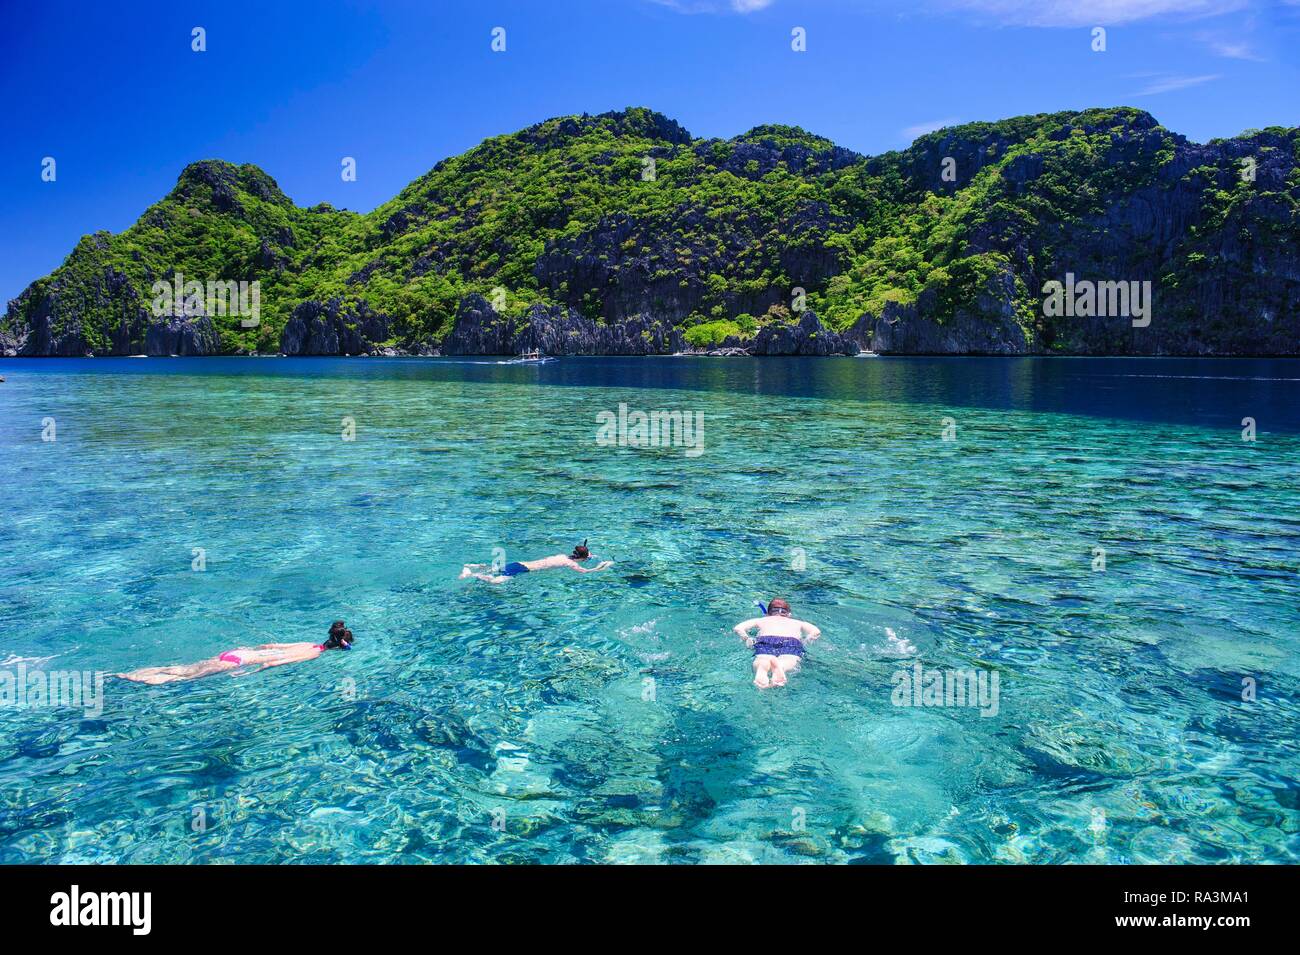 Tourists snorkeling in the crystal clear water in the Bacuit archipelago, Palawan, Philippines Stock Photo